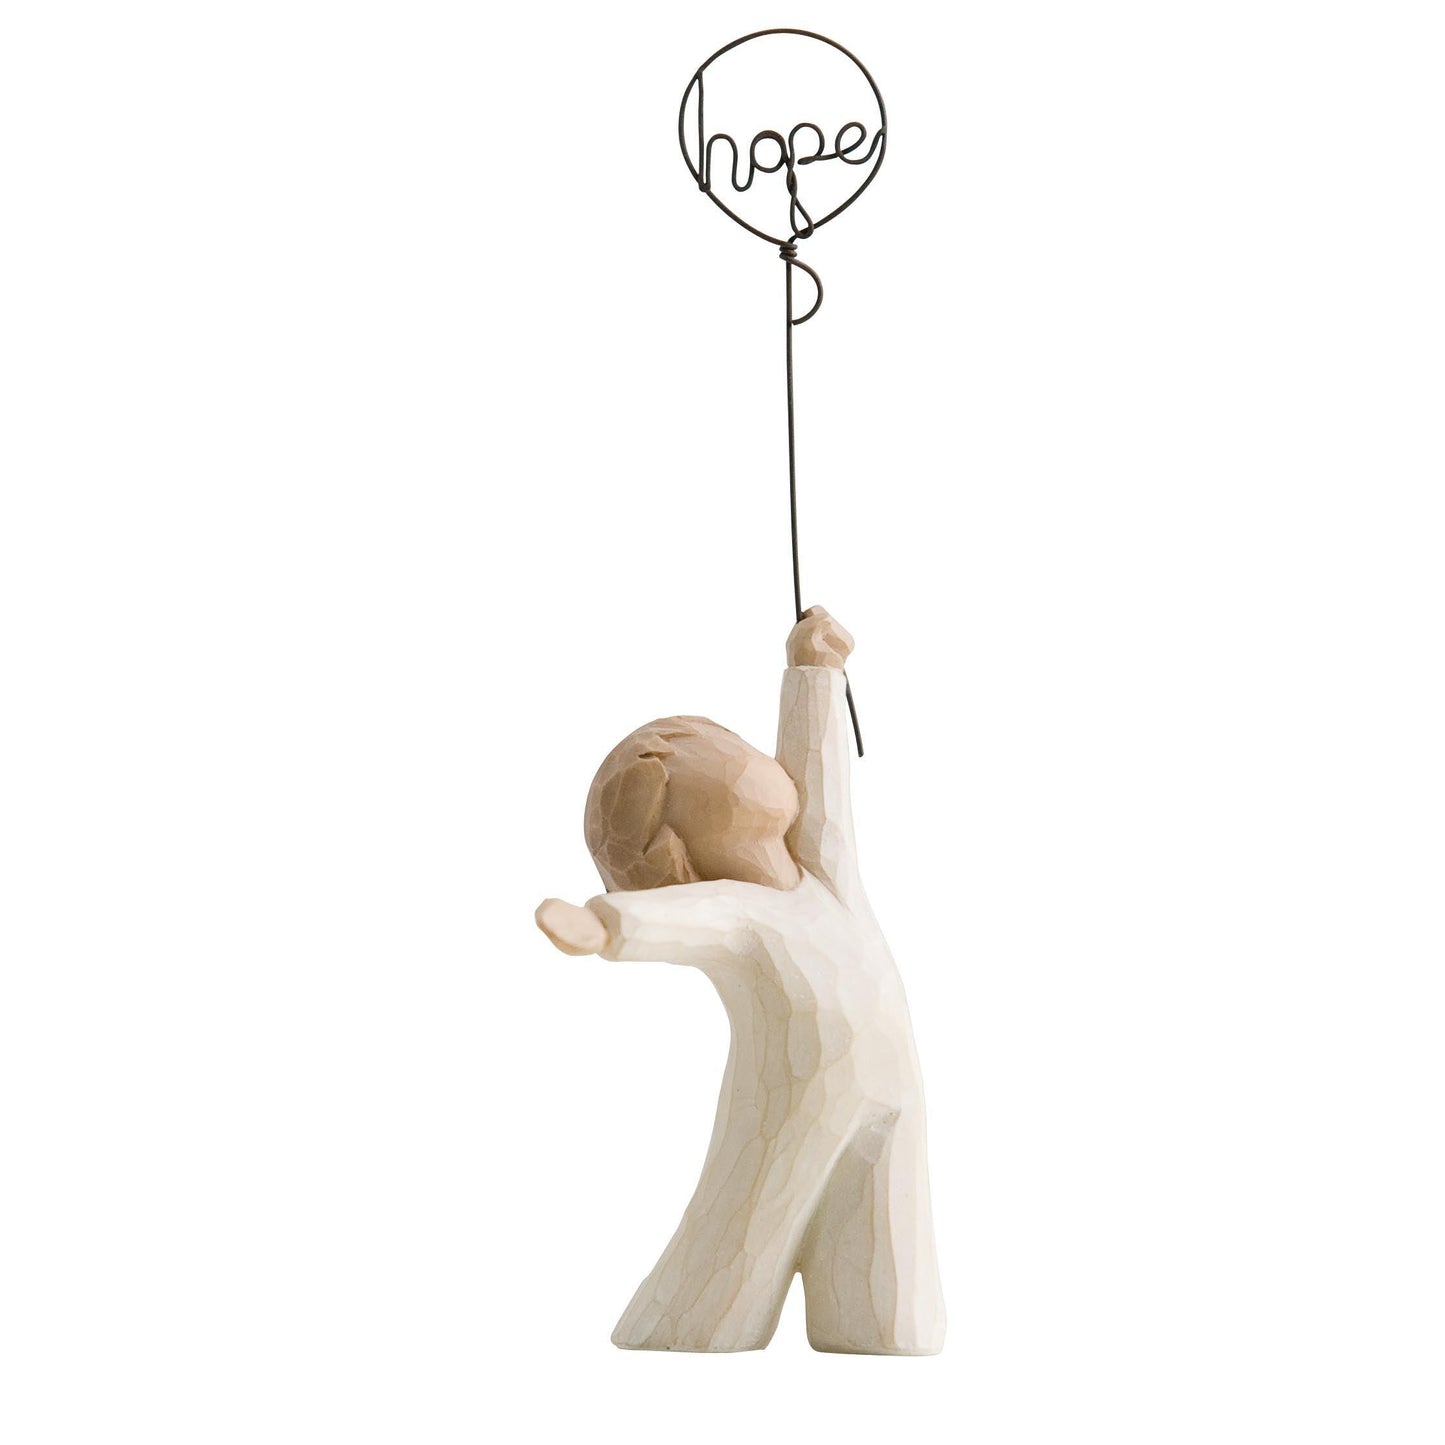 Willow Tree - Hope (Willow Tree) - Gallery Gifts Online 